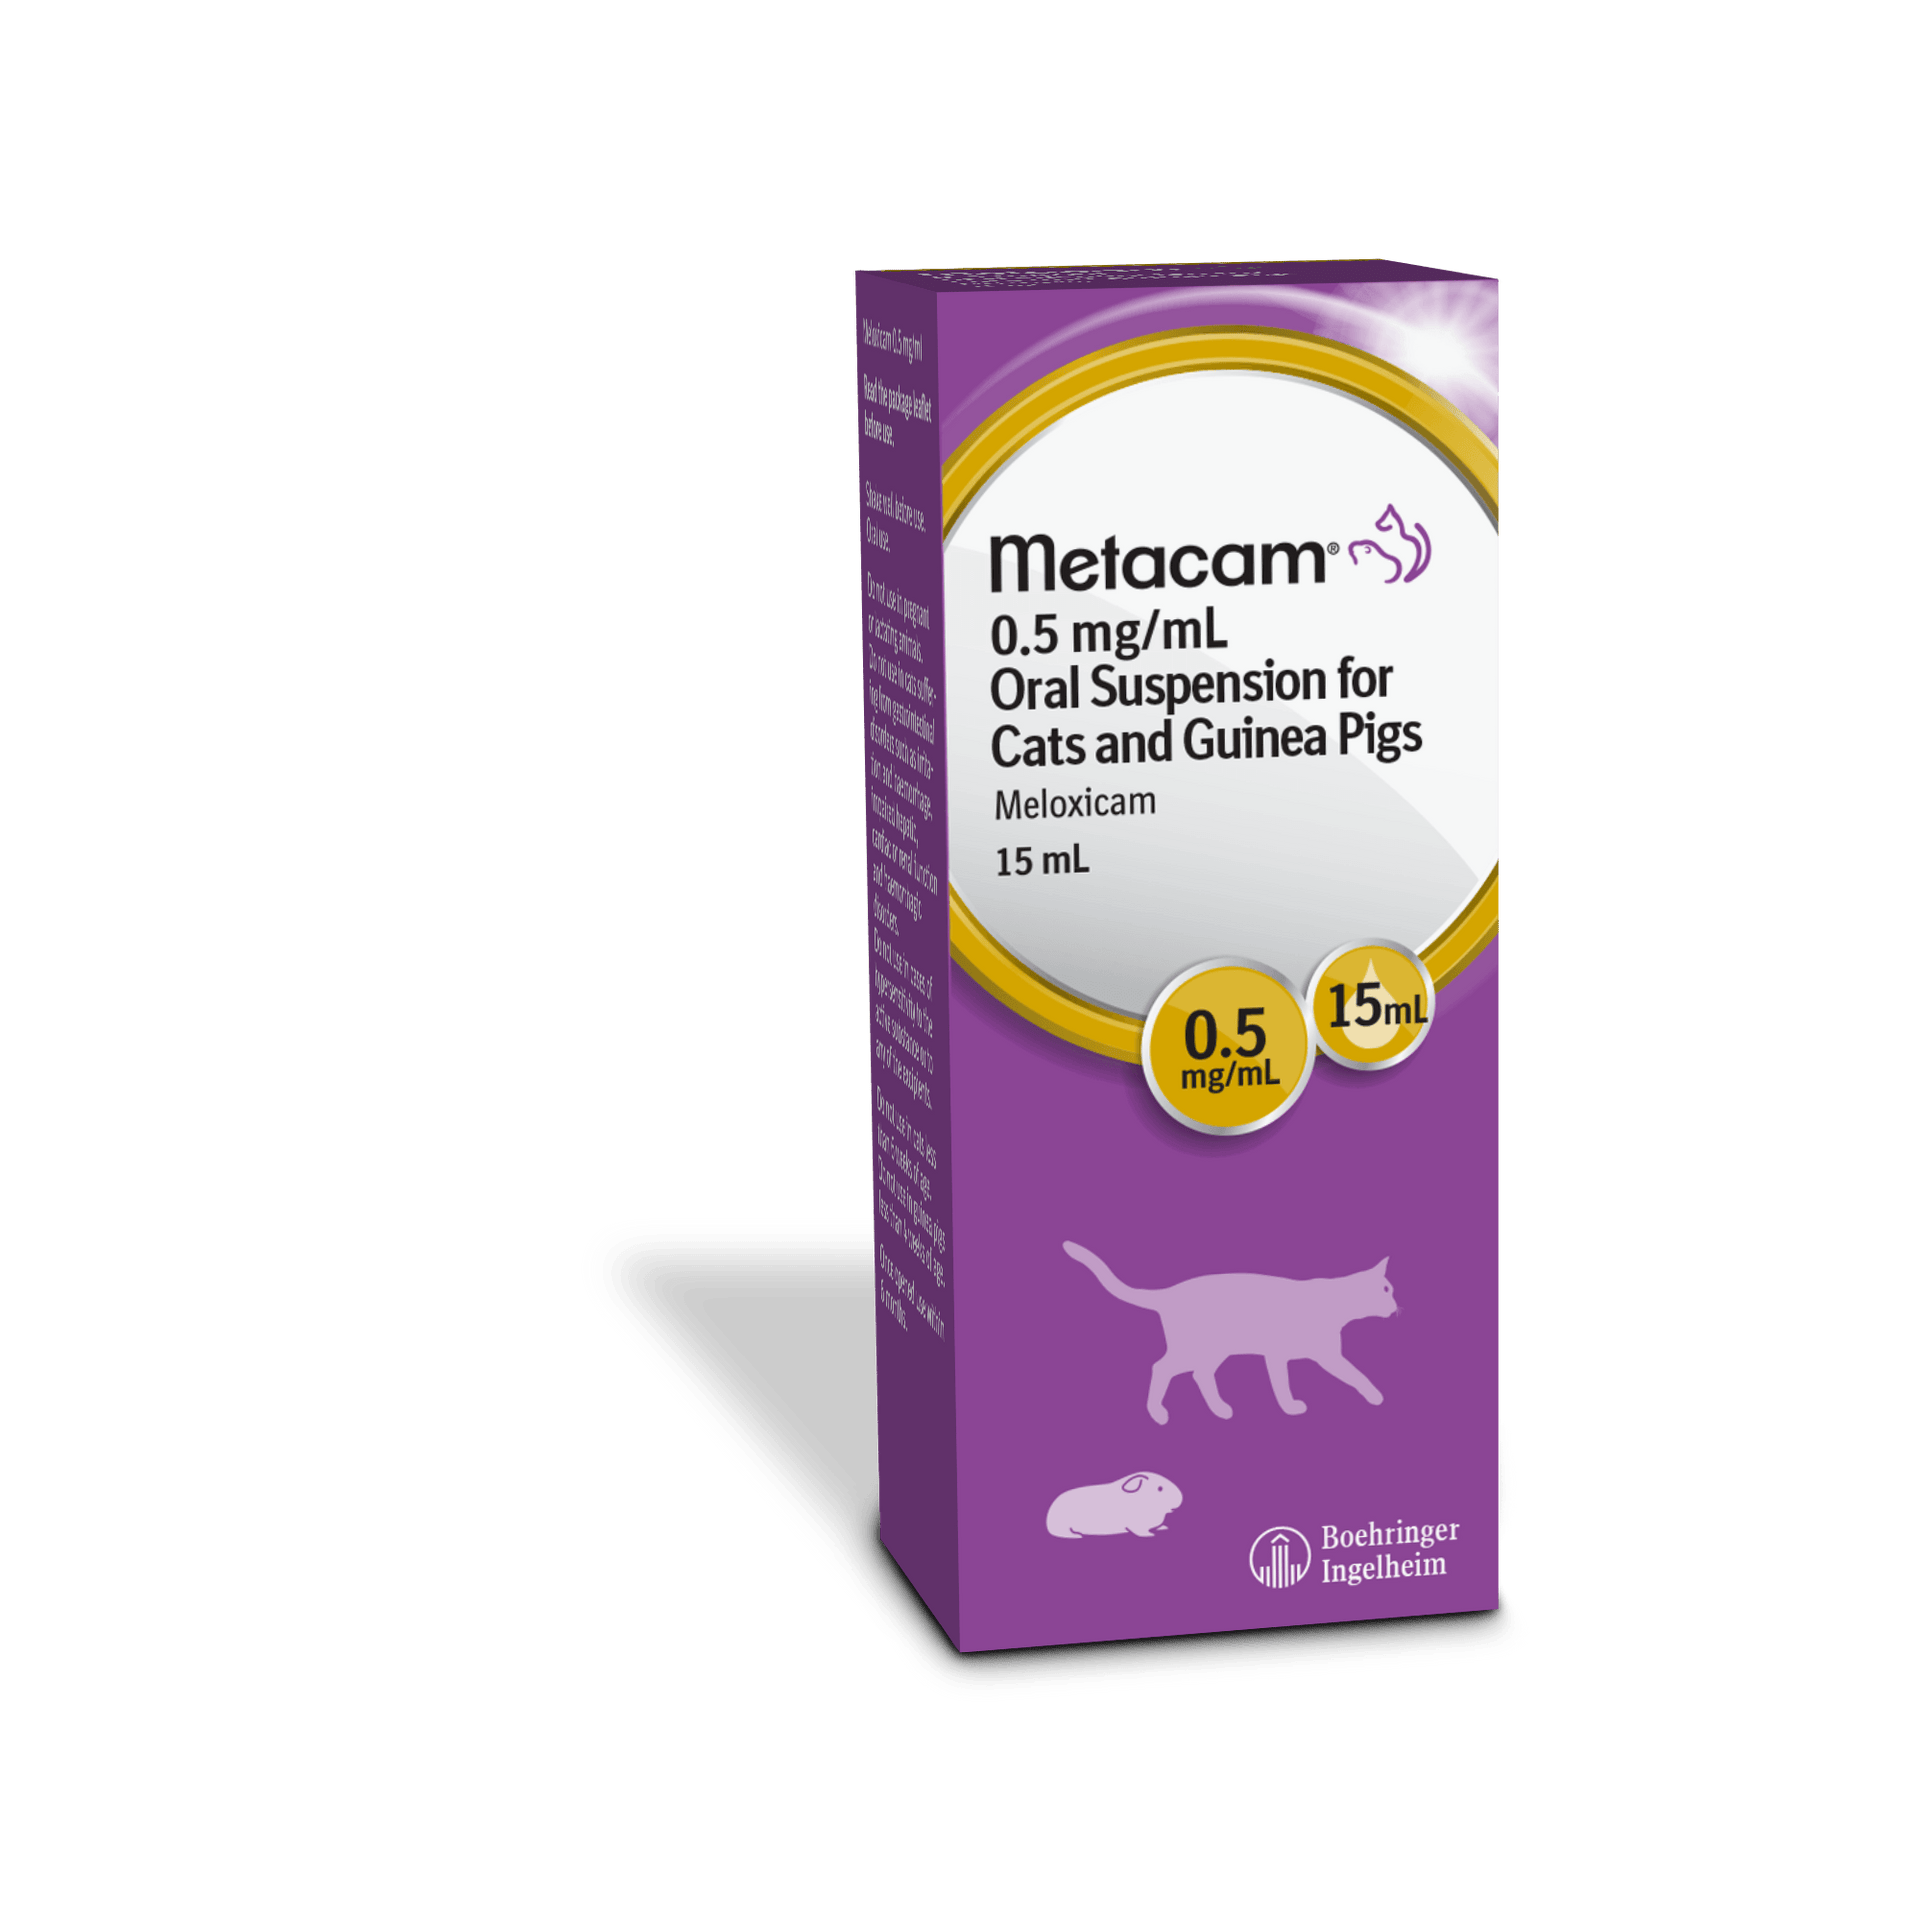 Metacam 0.5mg/mL Oral Suspension for Cats and Guinea Pigs 15ml